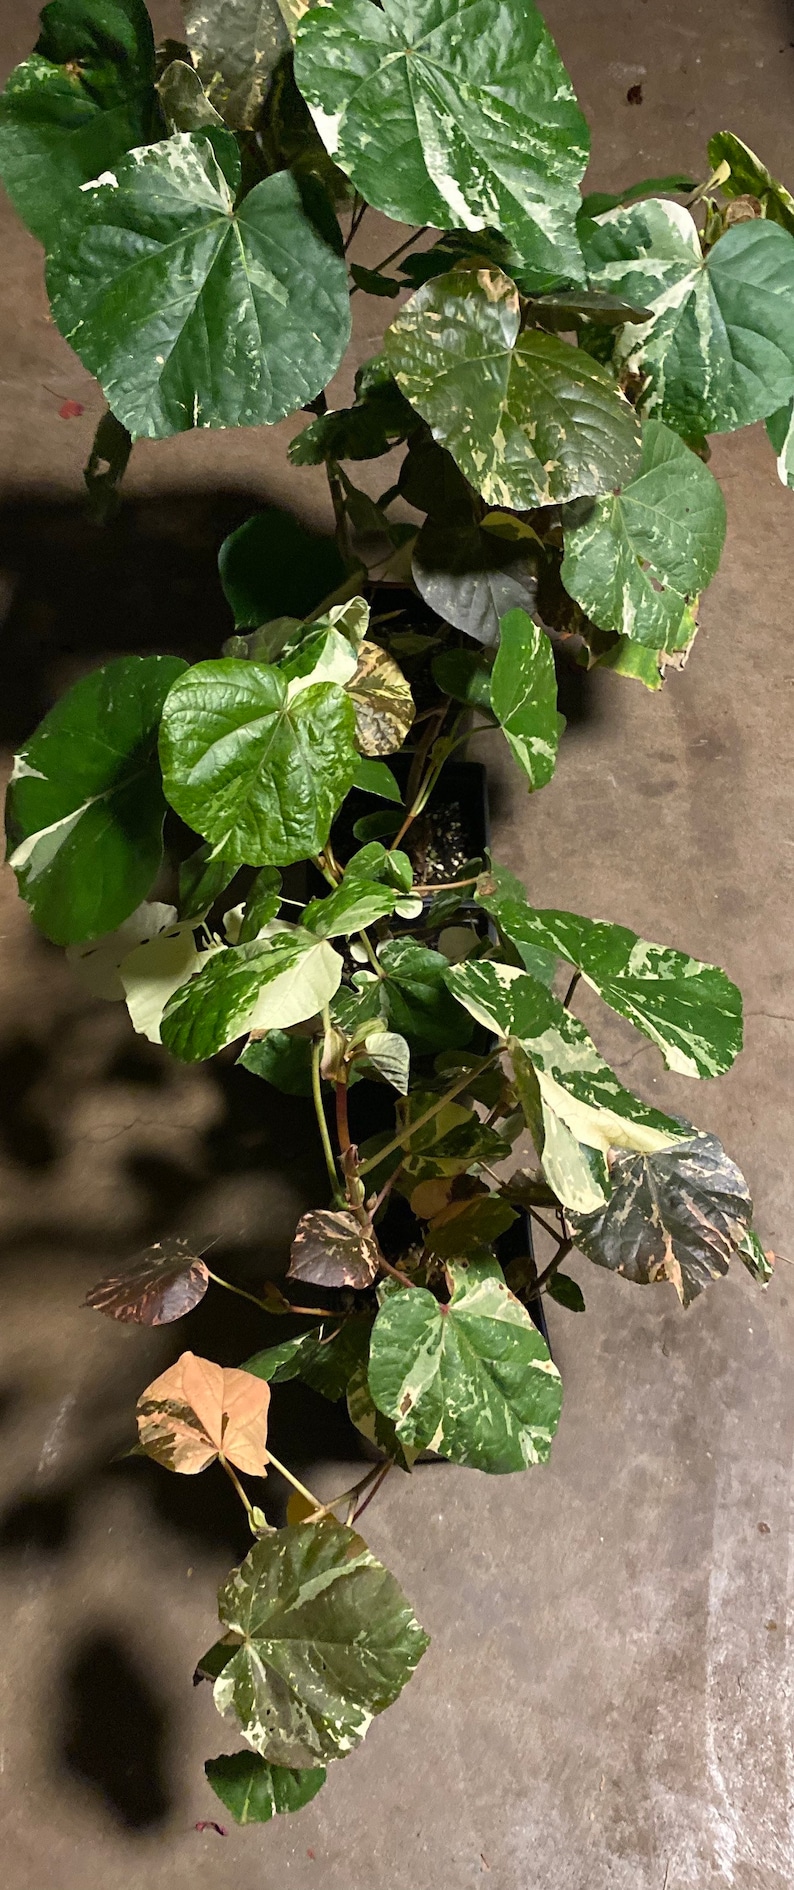 Sale HIBISCUS TILIACEUS VARIEGATA cutting 6 cuts of 6 inches easy to root and fast growing. image 3